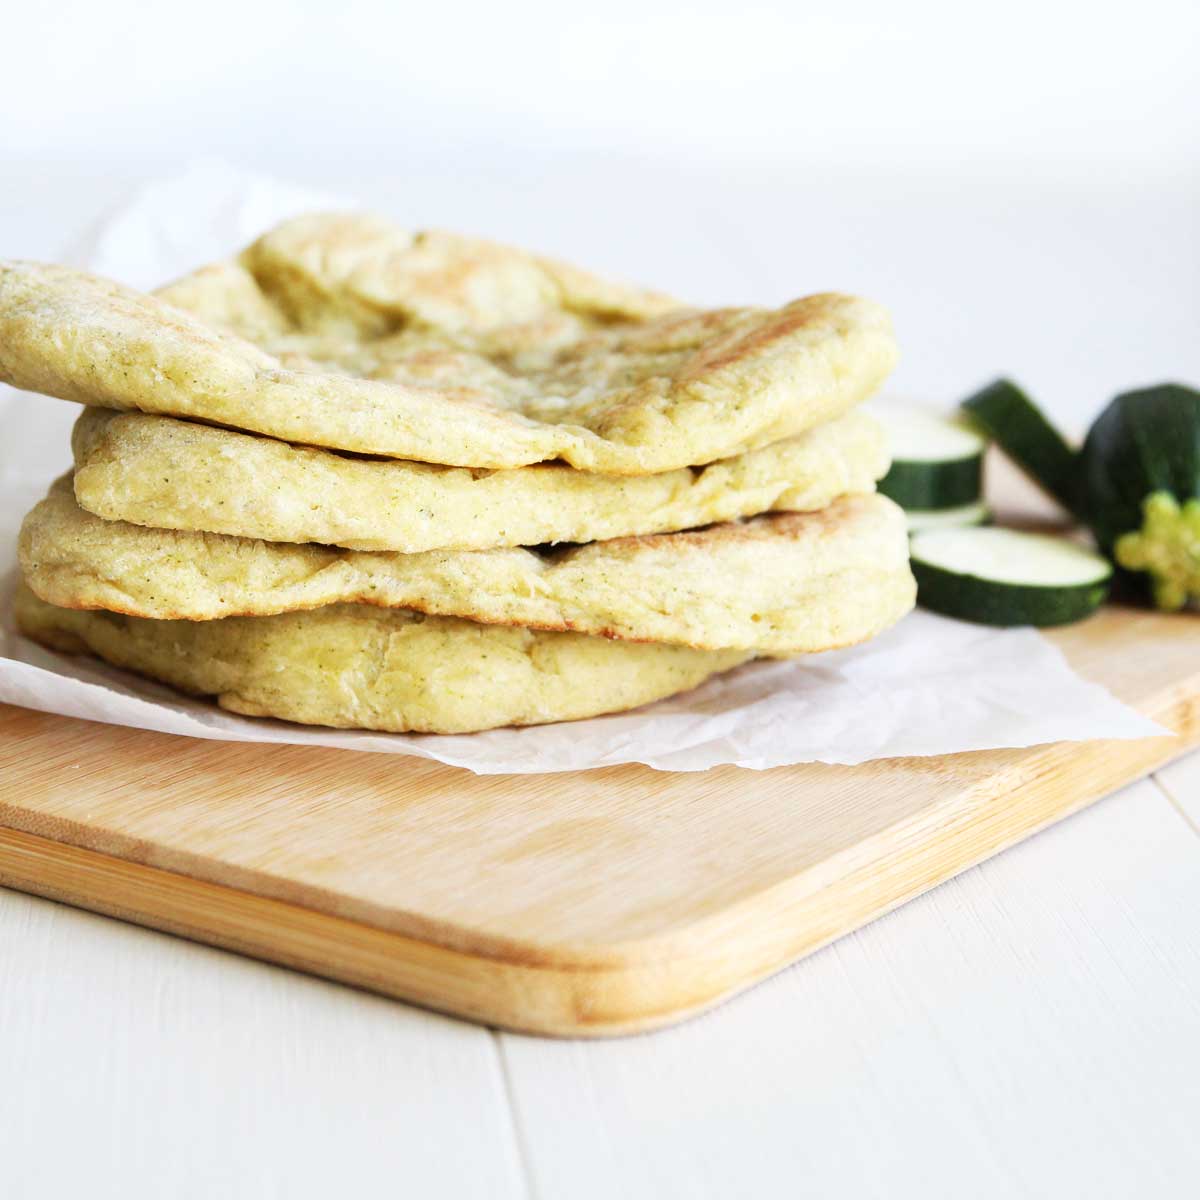 Healthy & Simple Zucchini Flatbread Made in the Food Processor